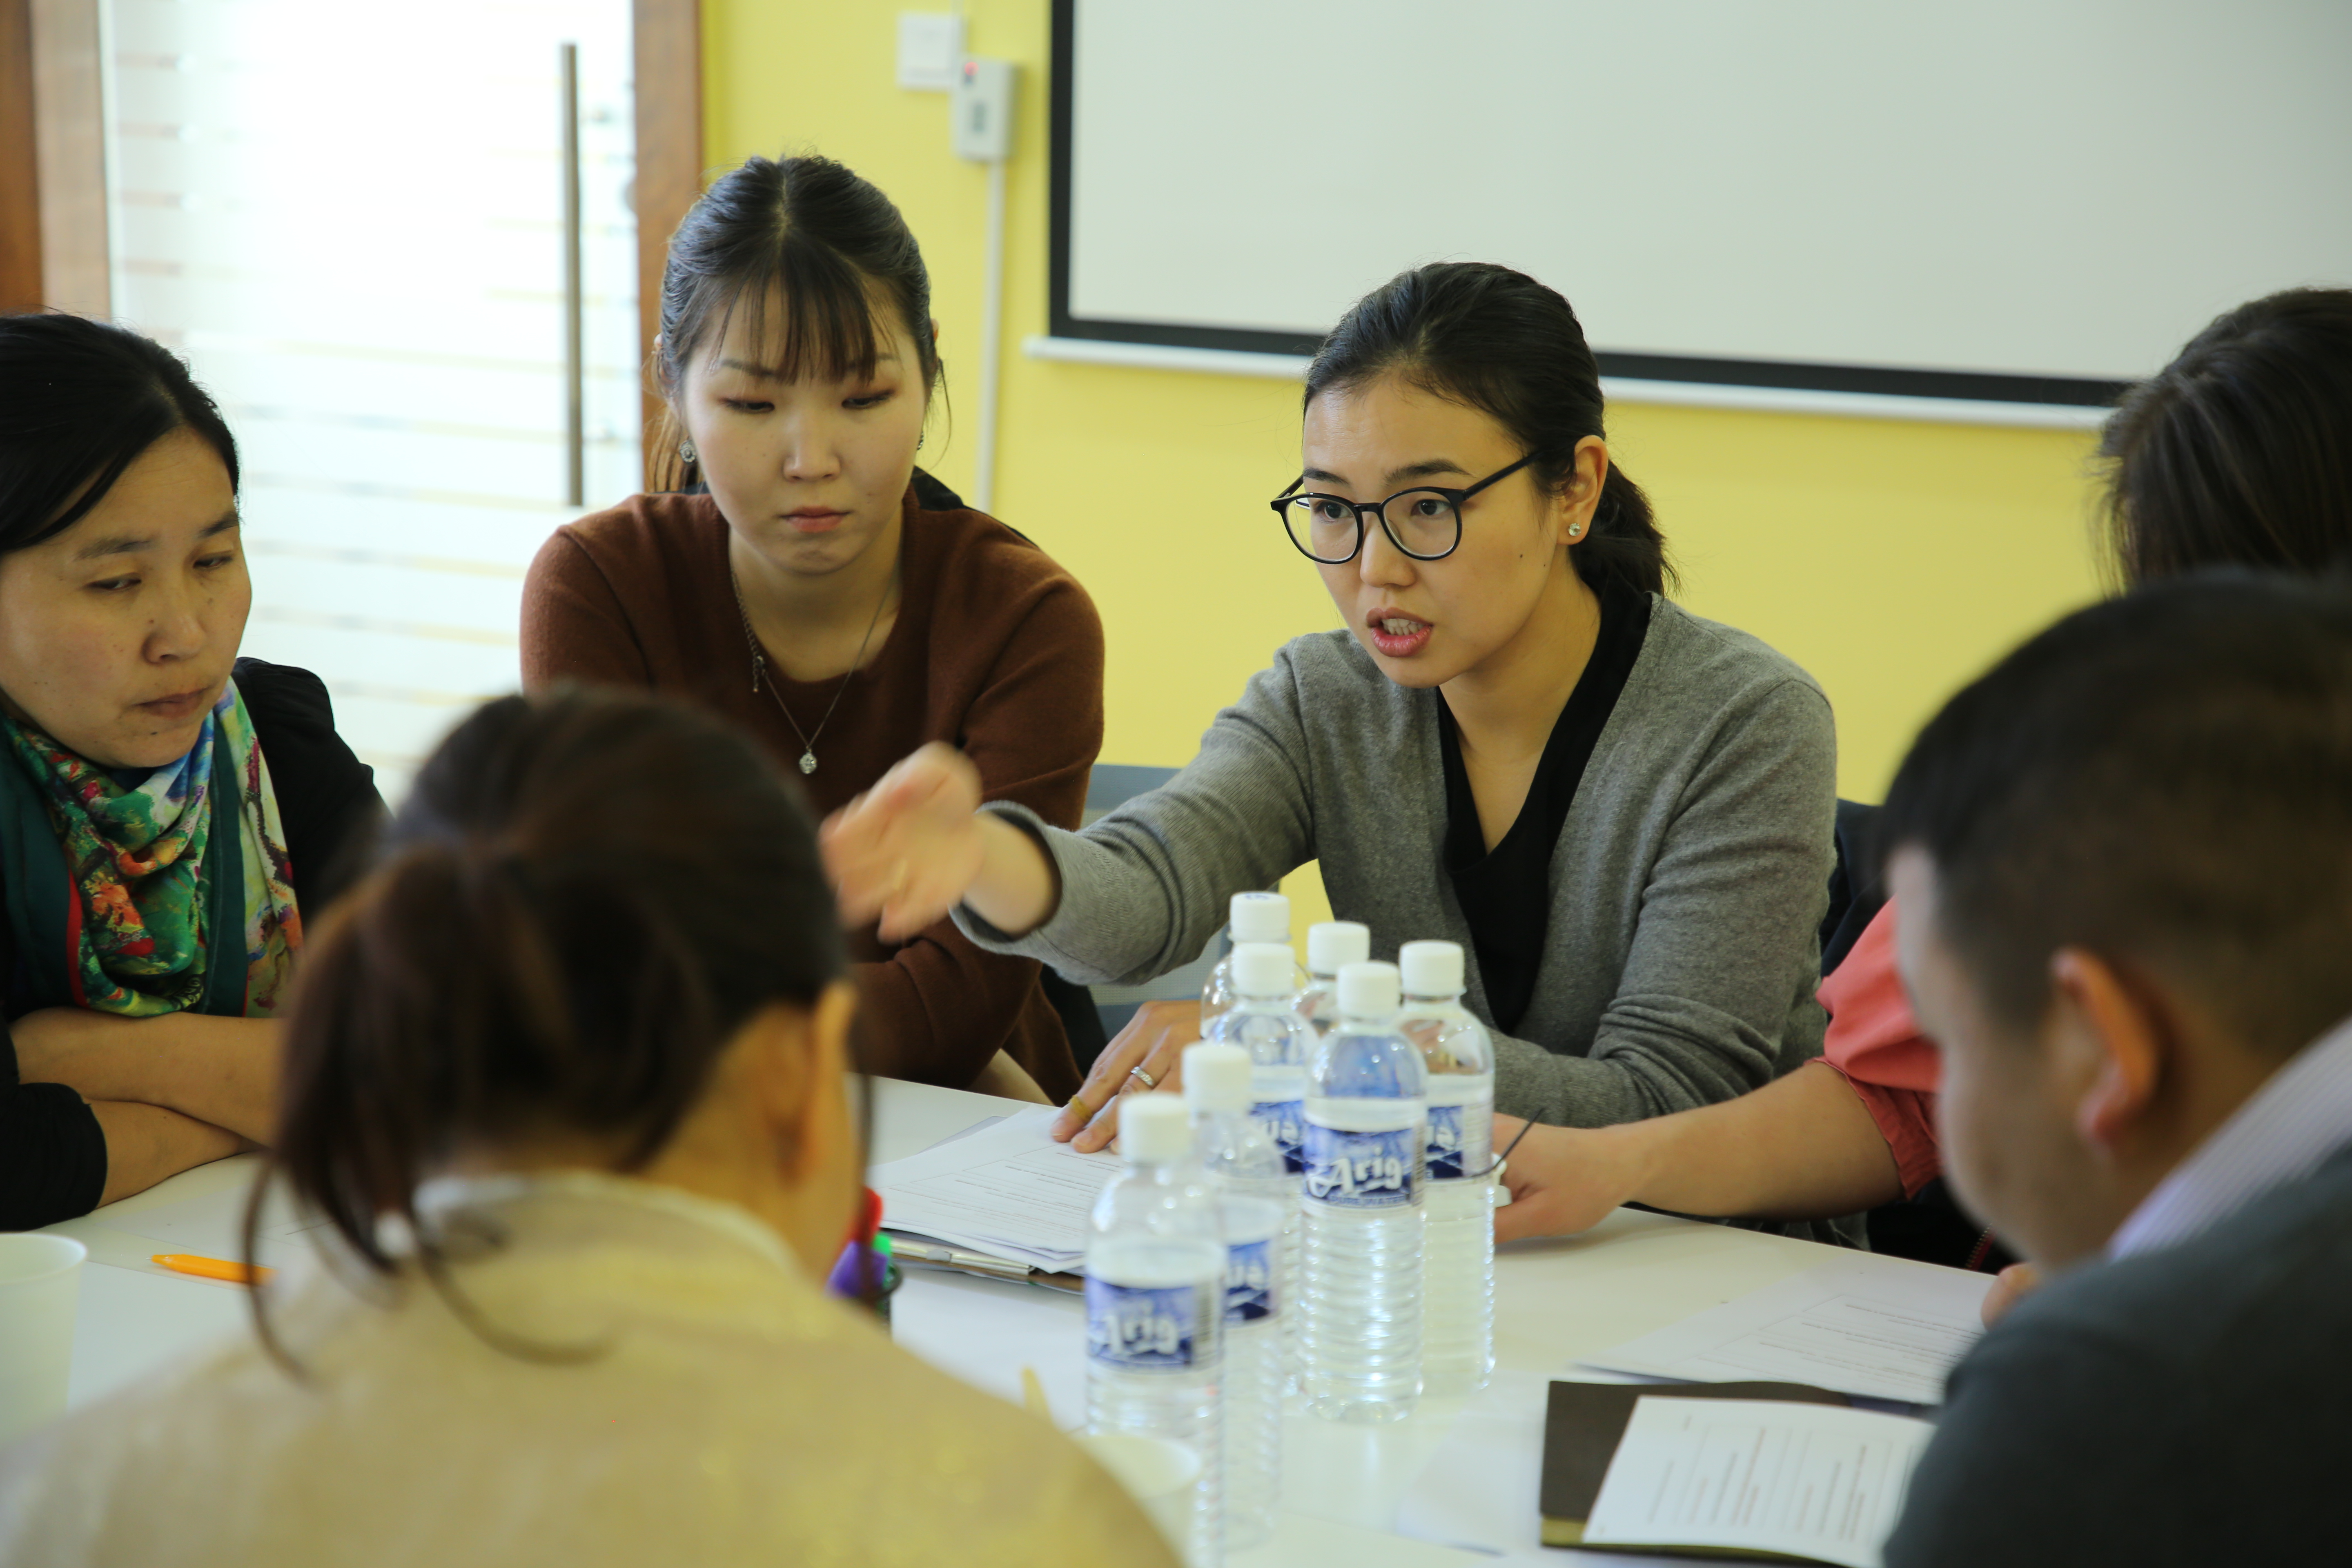 Khoroo organizers participate in “Citizen-centered civil service” training organized by the Municipality of Ulaanbaatar Training Center established in 2017. 